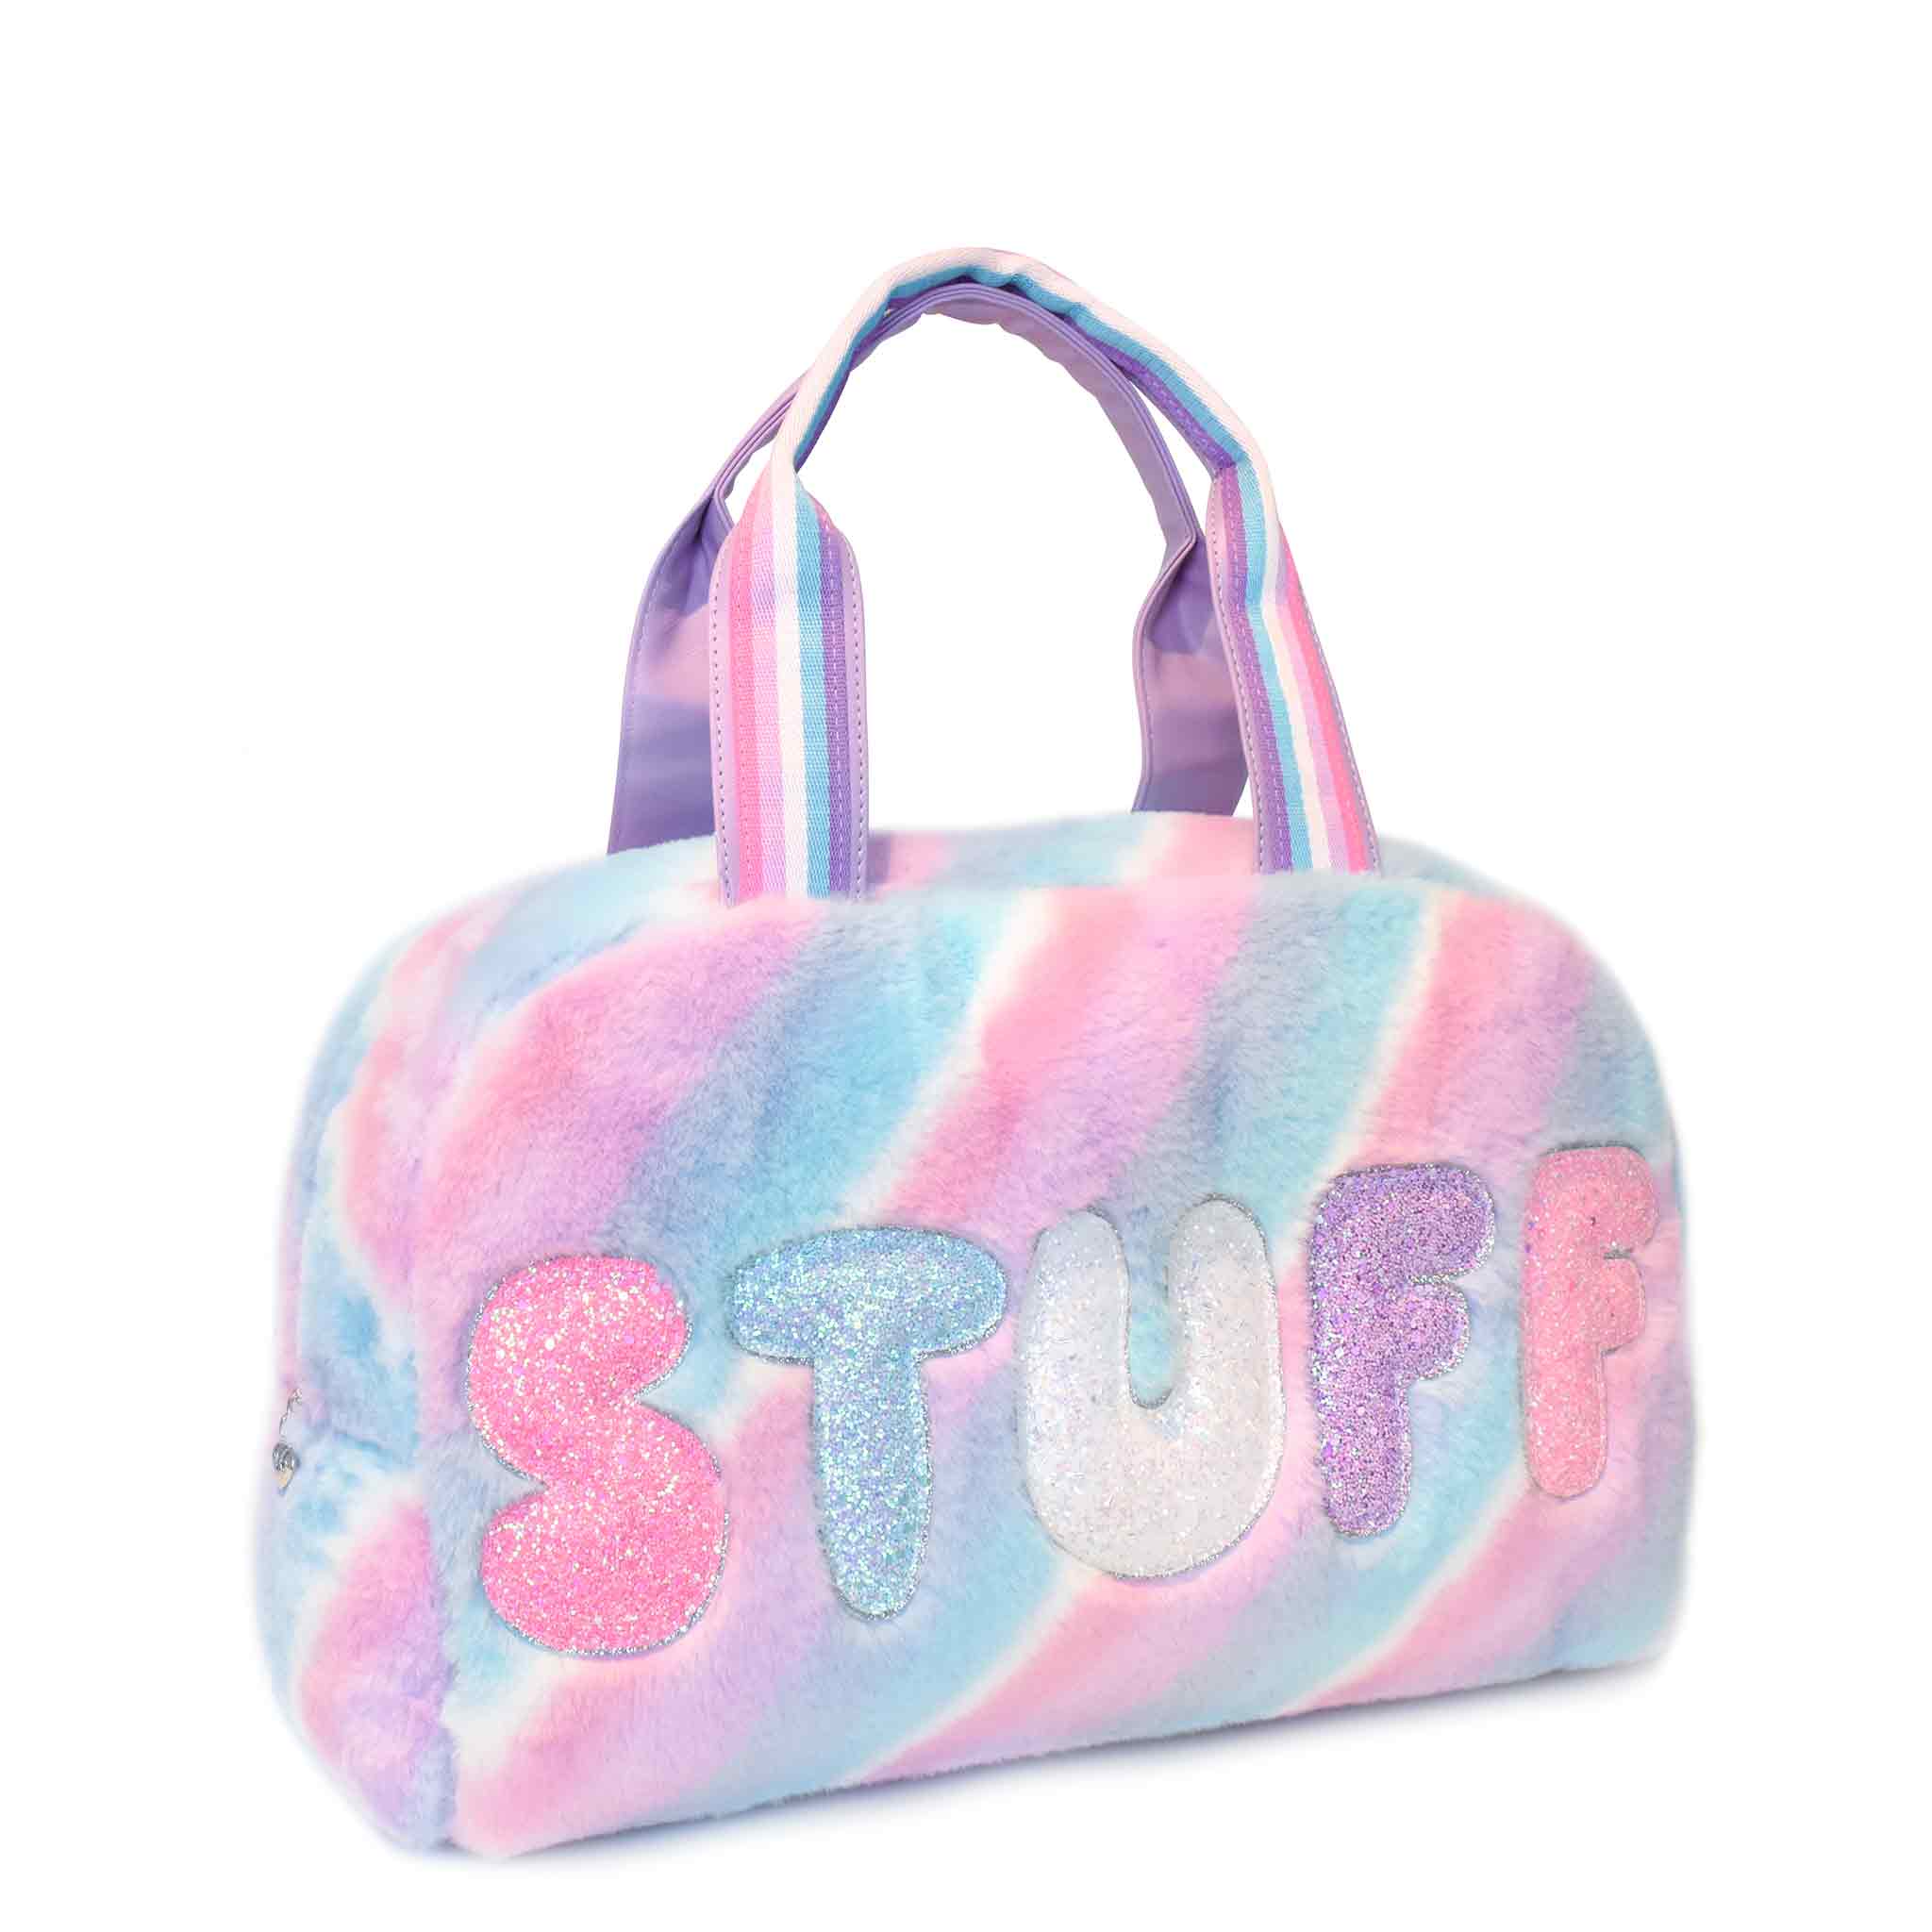 Side View of a Pastel Blue Pink and Purple Striped Duffle with "Stuff" Glitter Letters